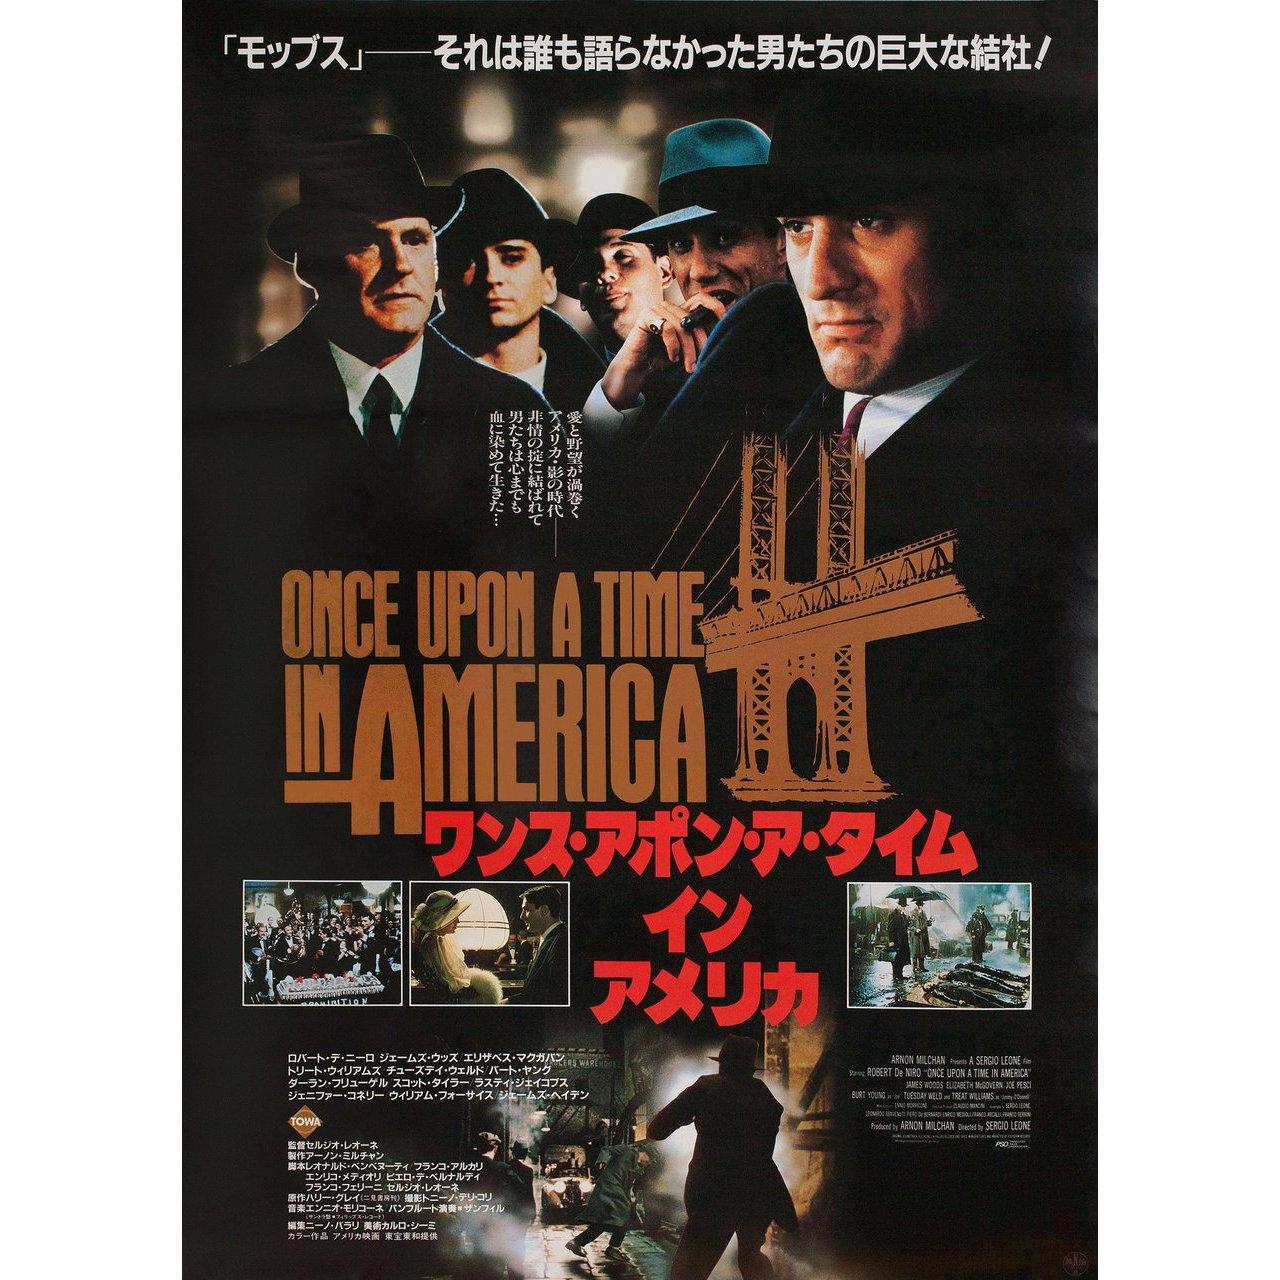 Original 1984 Japanese B2 poster for the film 'Once Upon a Time in America' directed by Sergio Leone with Robert De Niro / James Woods / Elizabeth McGovern / Joe Pesci. Fine condition, rolled. Please note: the size is stated in inches and the actual